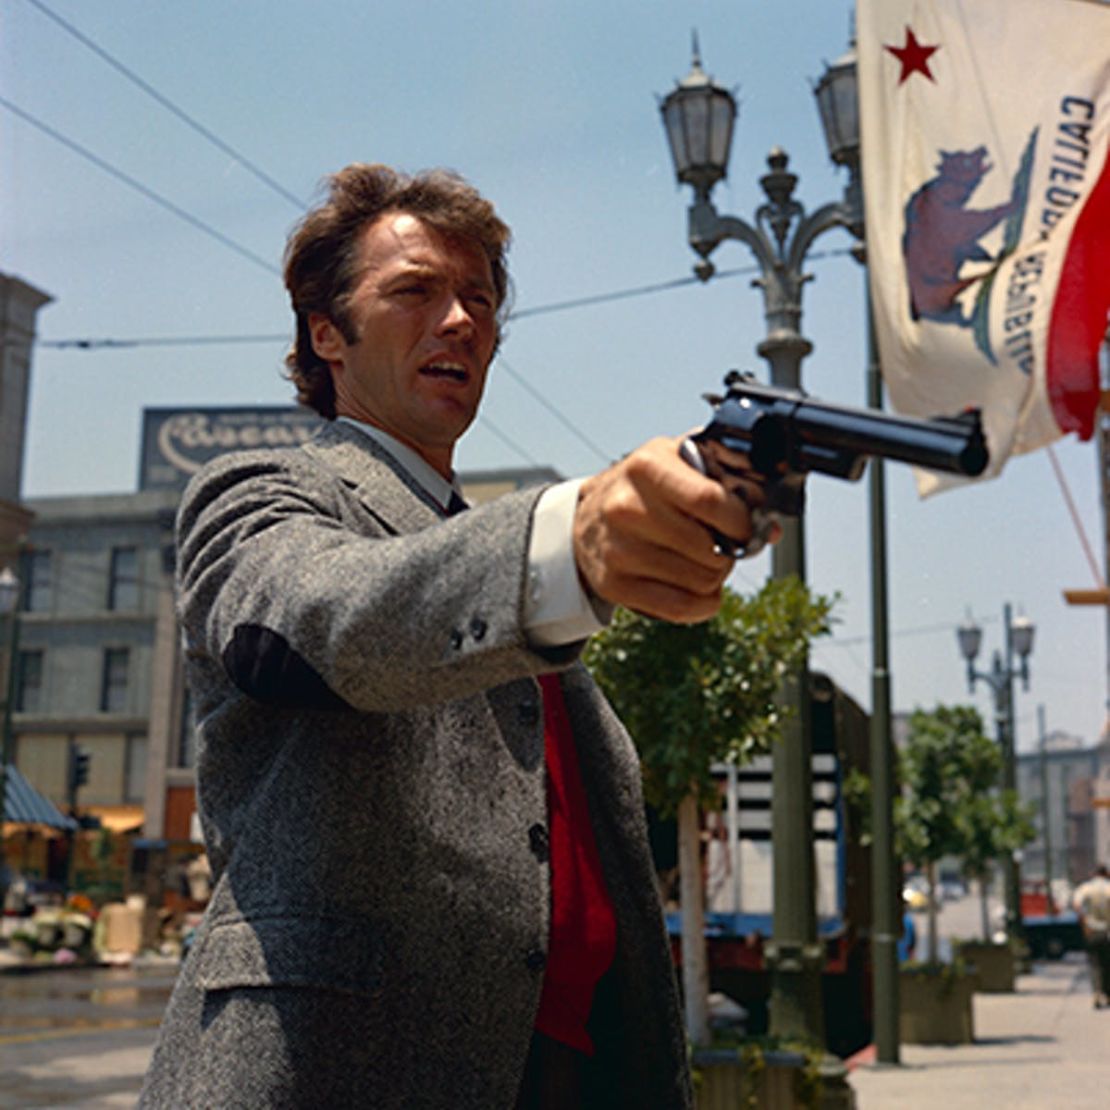 Clint Eastwood in 'Dirty Harry'